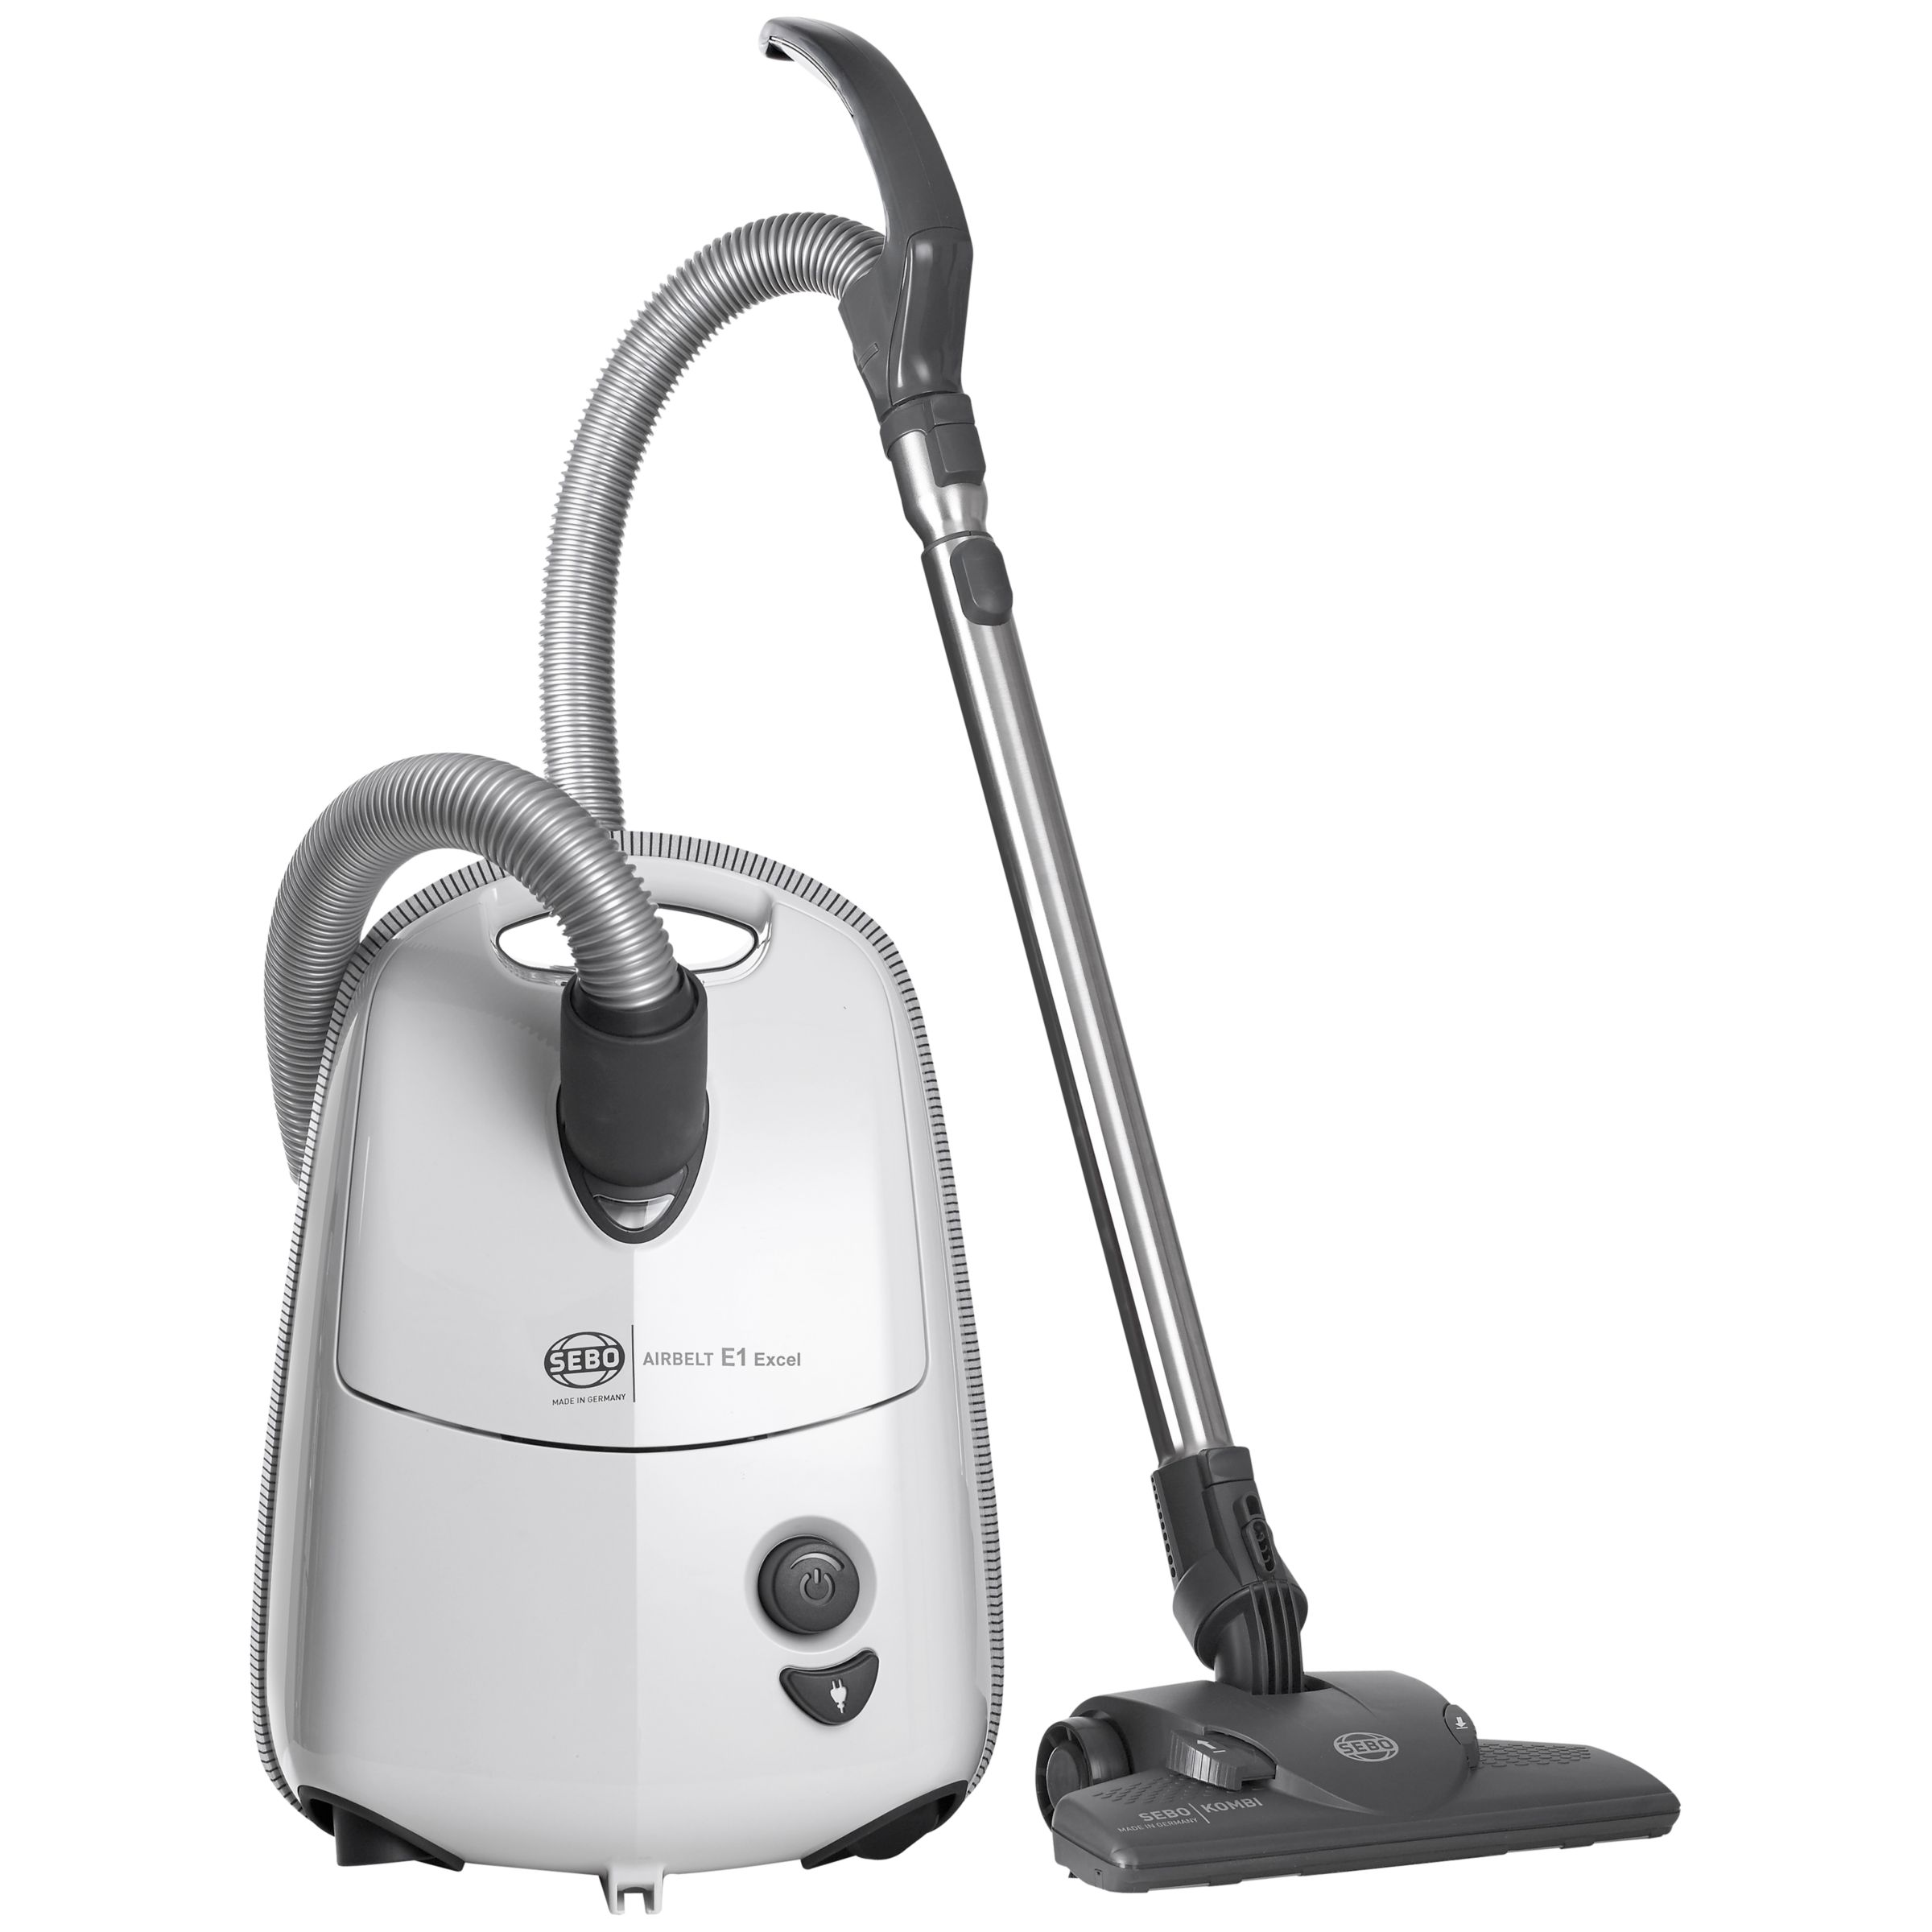 Sebo 91602GB Airbelt E1 Excel Vacuum Cleaner, White Review thumbnail